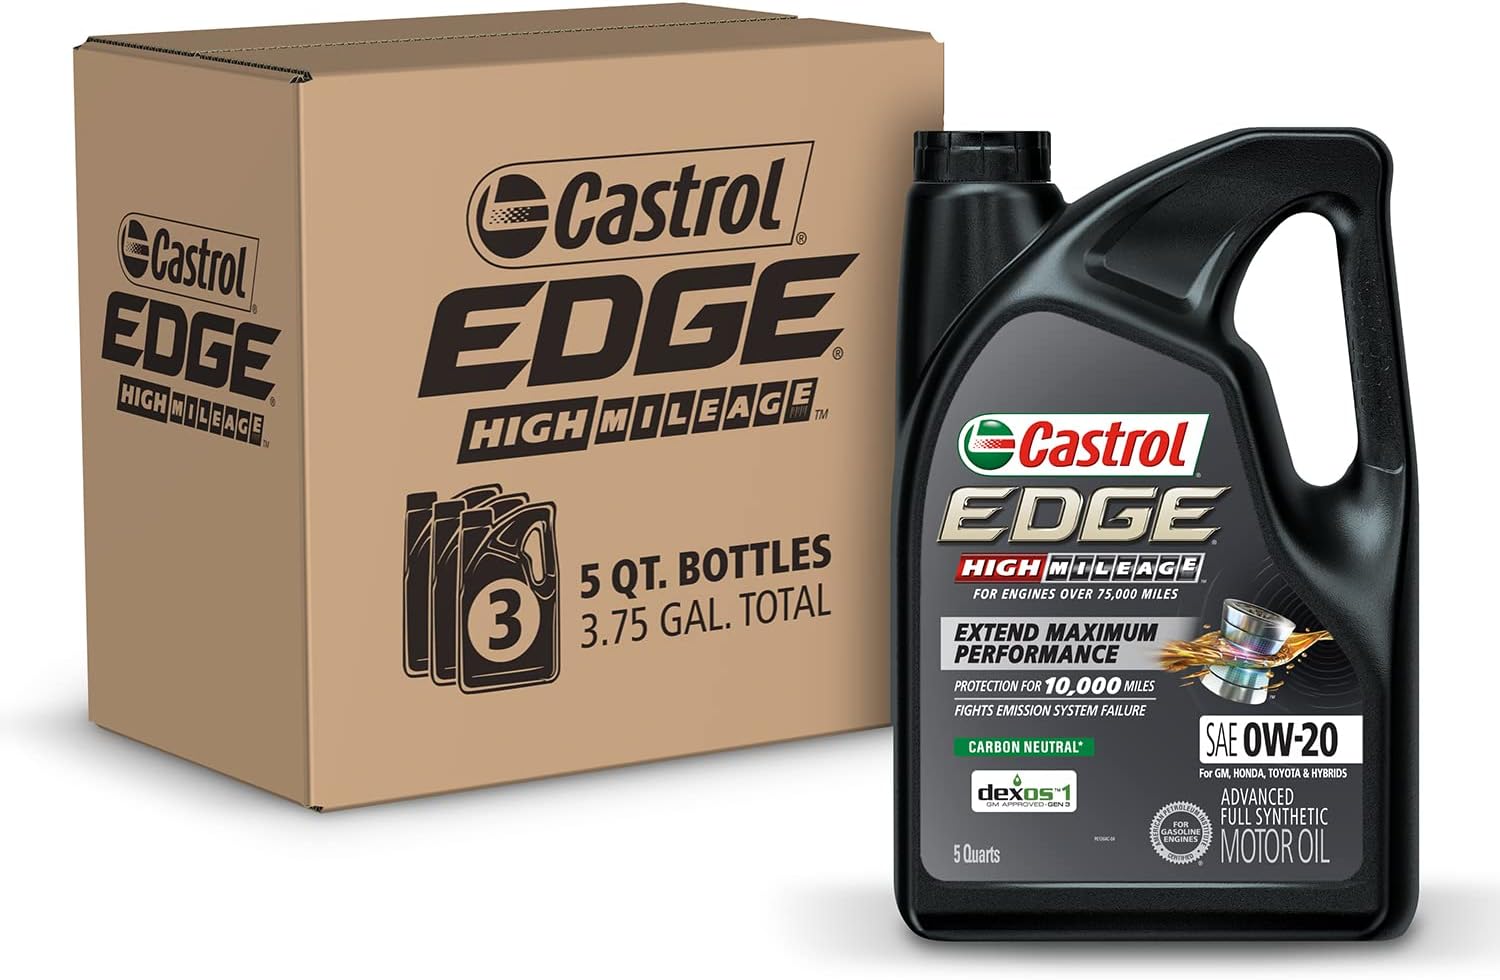 $67.61 w/ S&S: Castrol Edge High Mileage 0W-20 Advanced Full Synthetic Motor Oil, 5 Quarts, Pack of 3 Amazon